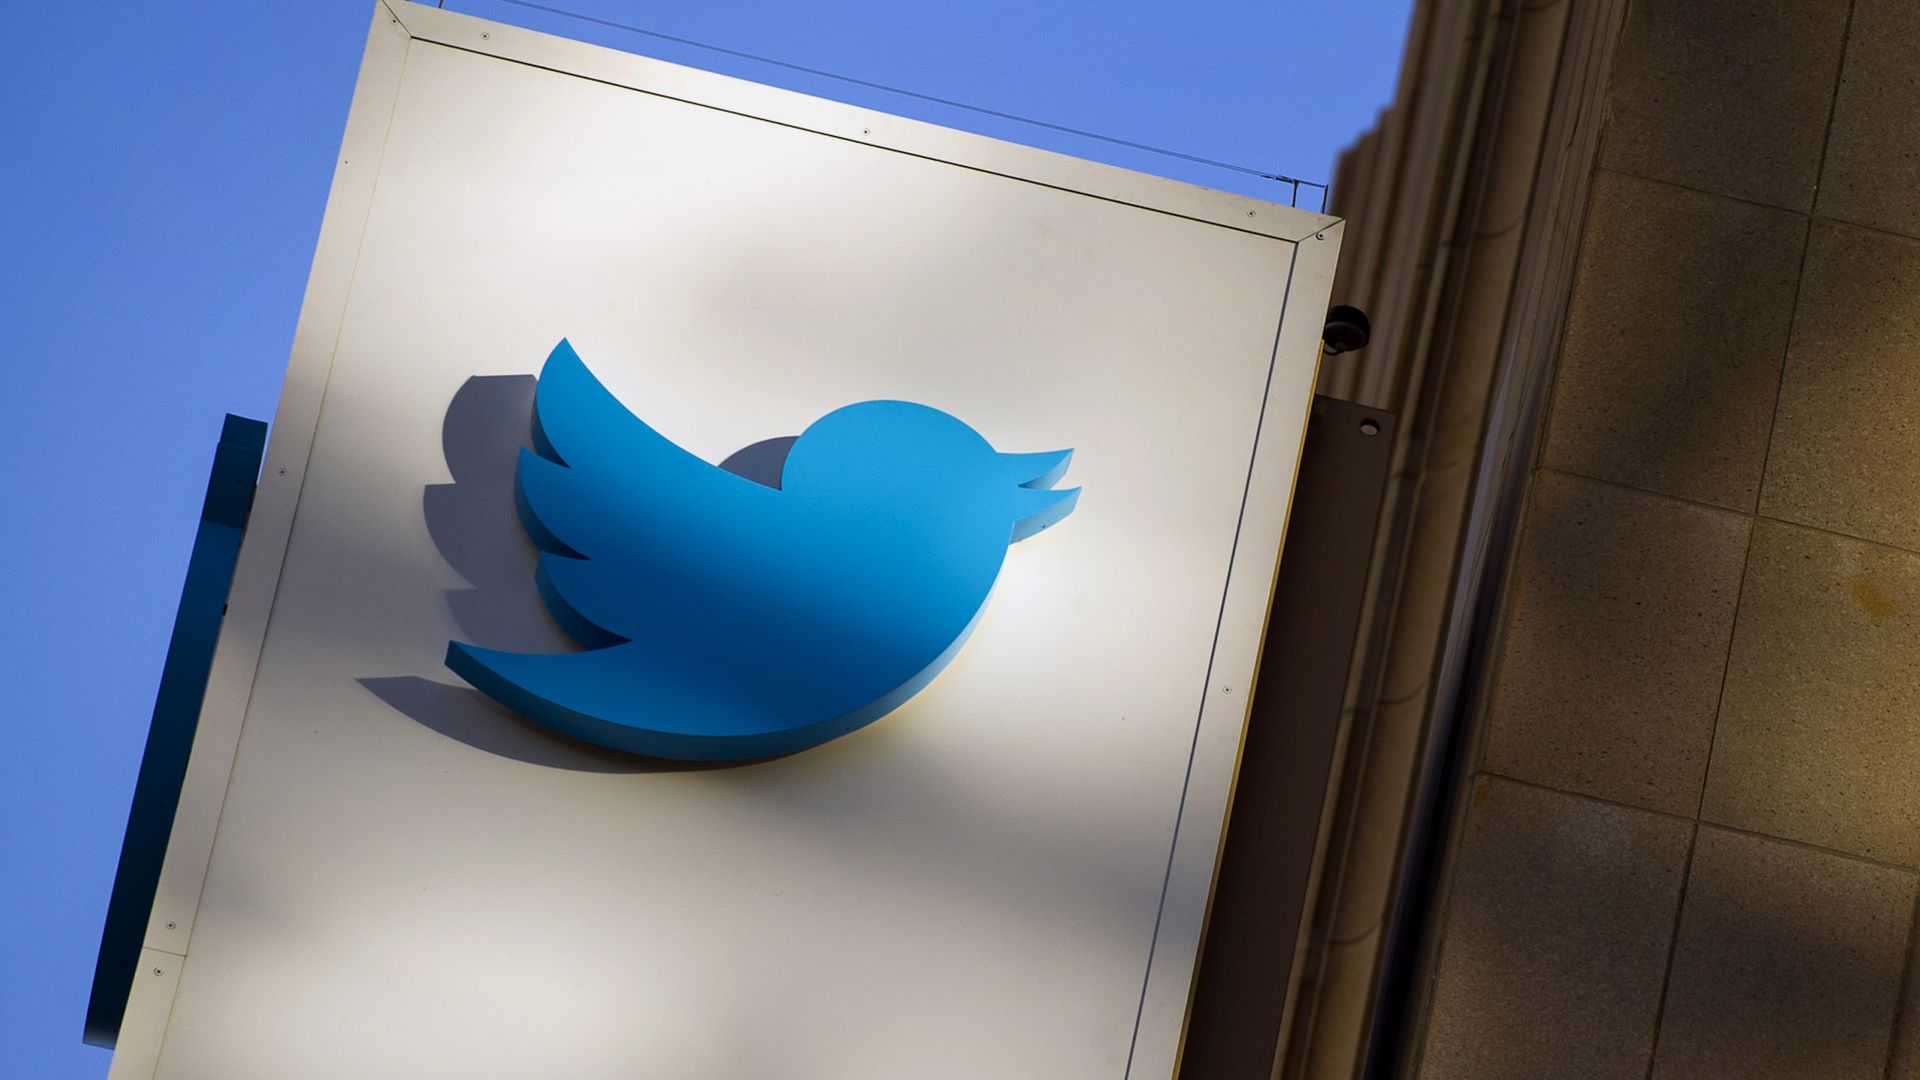 The Twitter Inc. logo is displayed on the facade of the company's headquarters in San Francisco, California